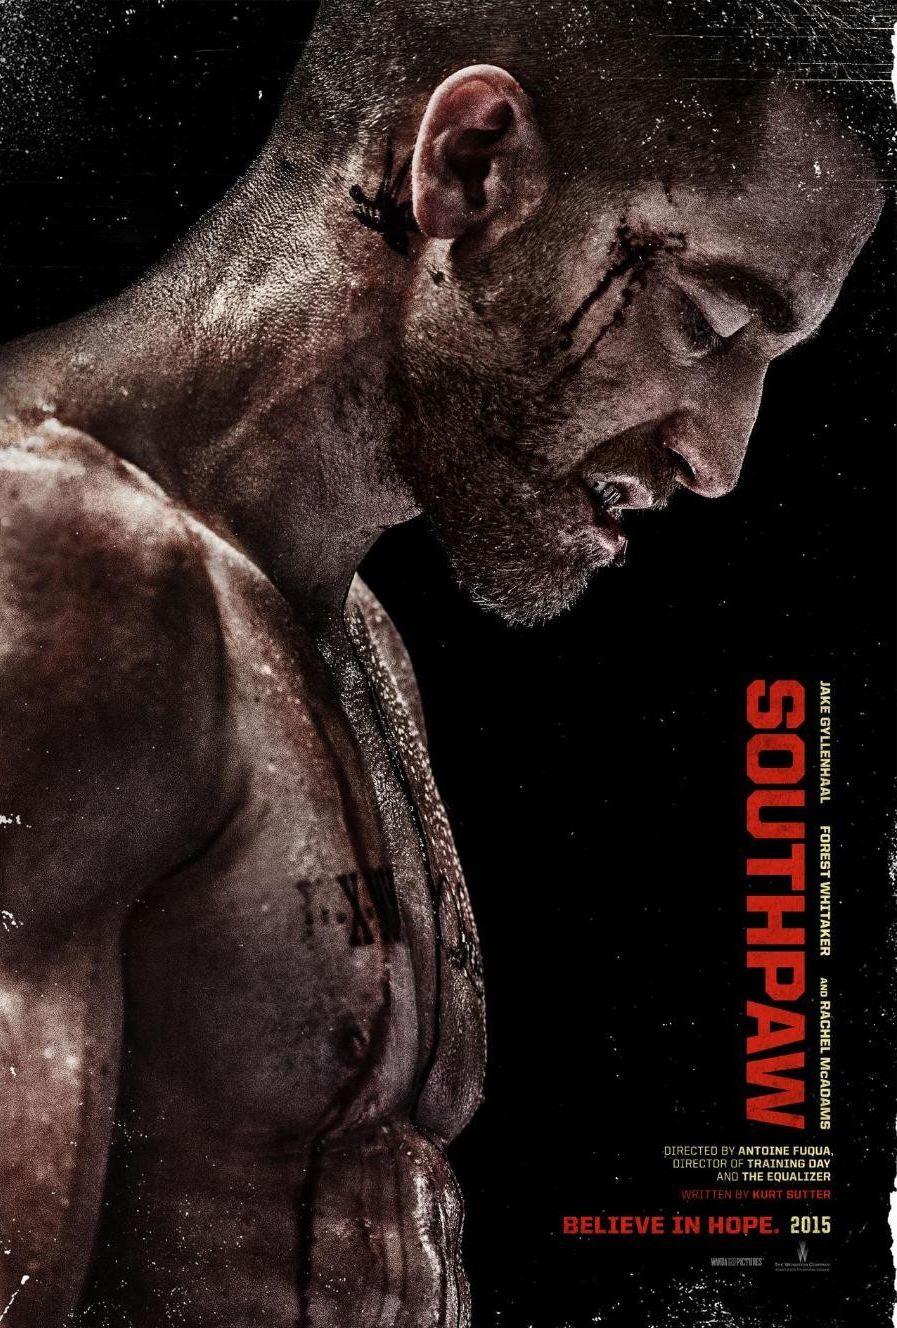 First poster for Southpaw with Jake Gyllenhaal as boxer Bill